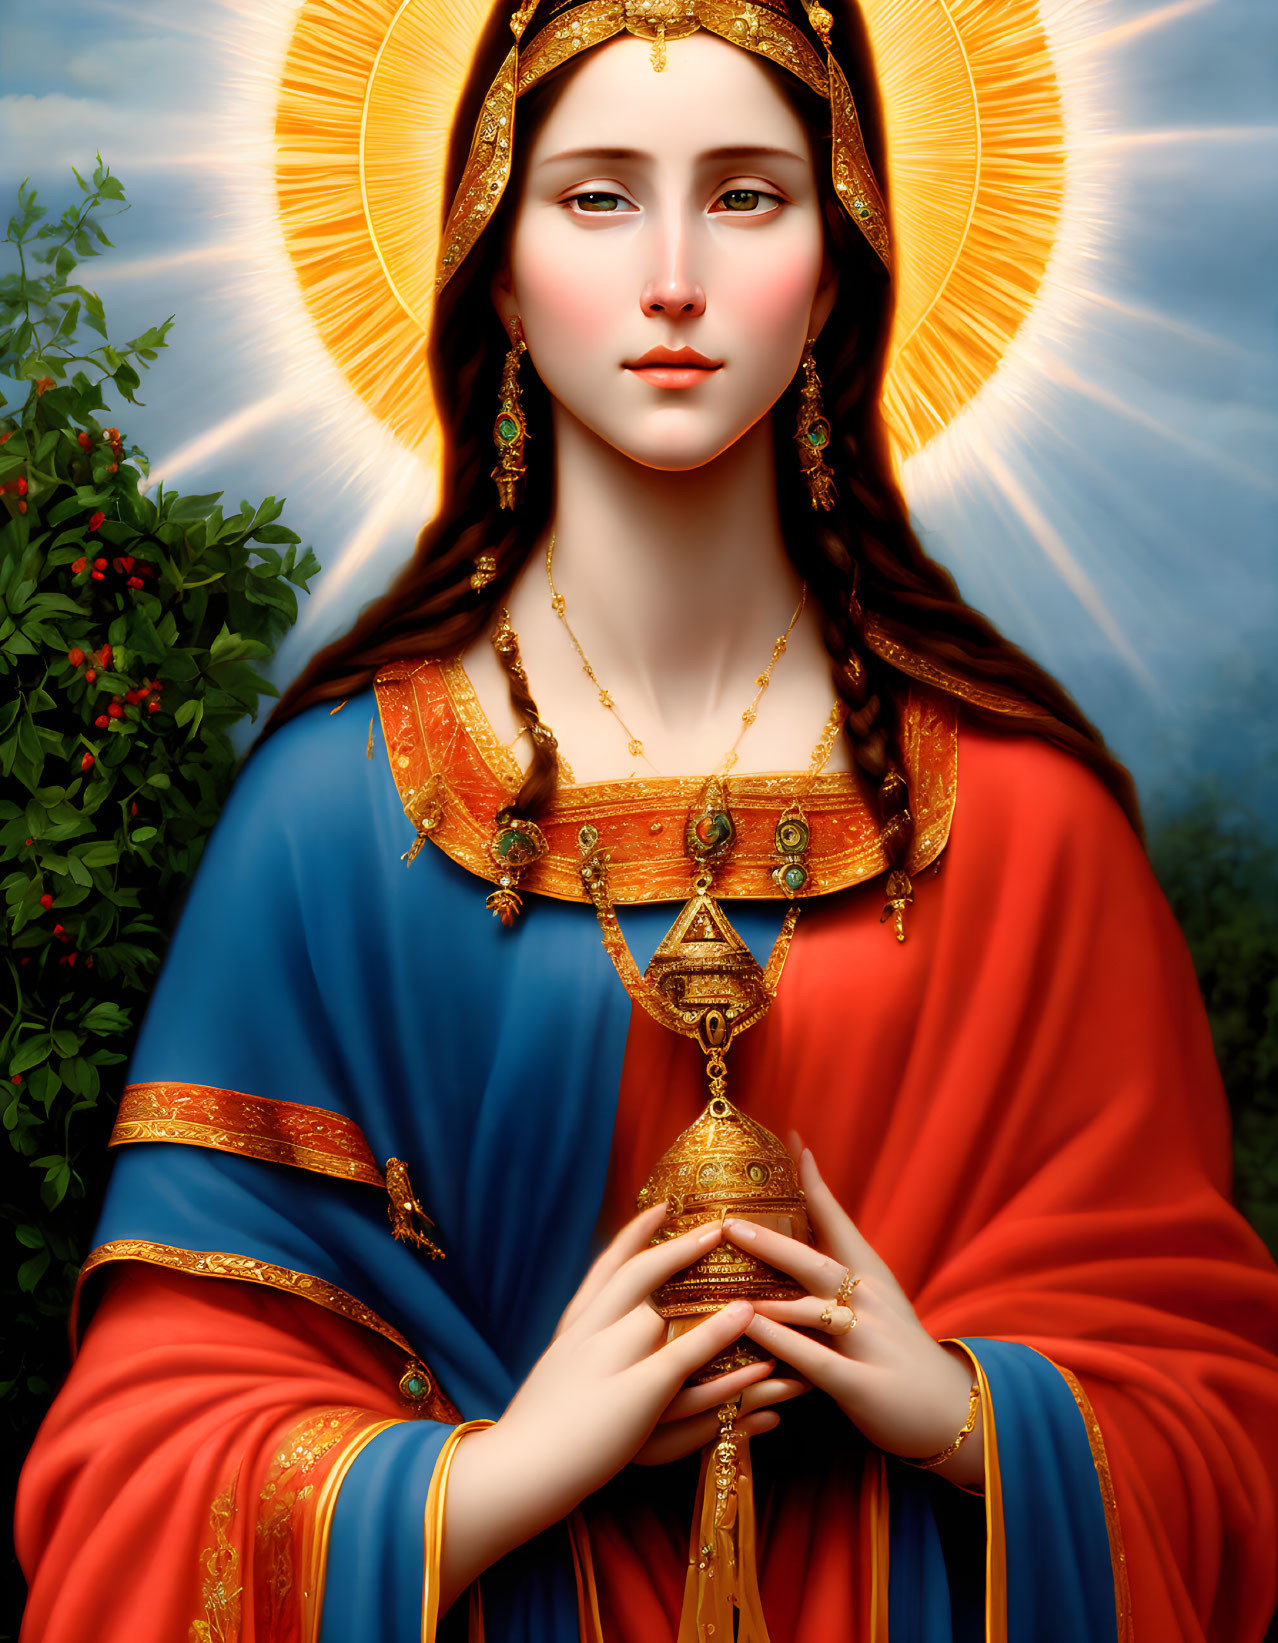 Digital painting of woman with halo, blue mantle, red garment, holding golden heart-shaped object